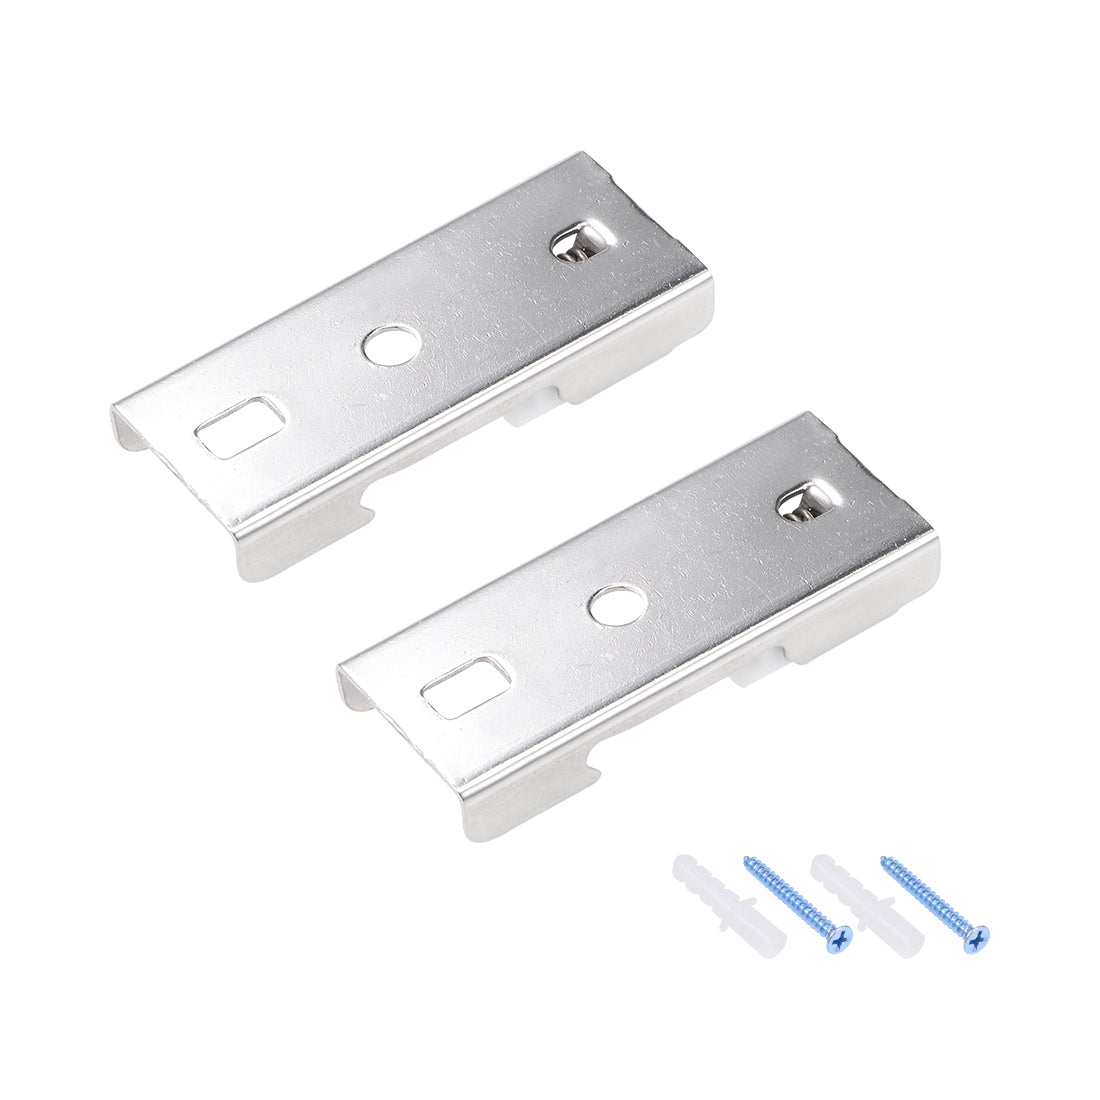 uxcell Uxcell Curtain Rod Bracket Stainless Steel Drapery Track Holder for 20mm Rail Top Mounted on Ceiling 2 Pcs